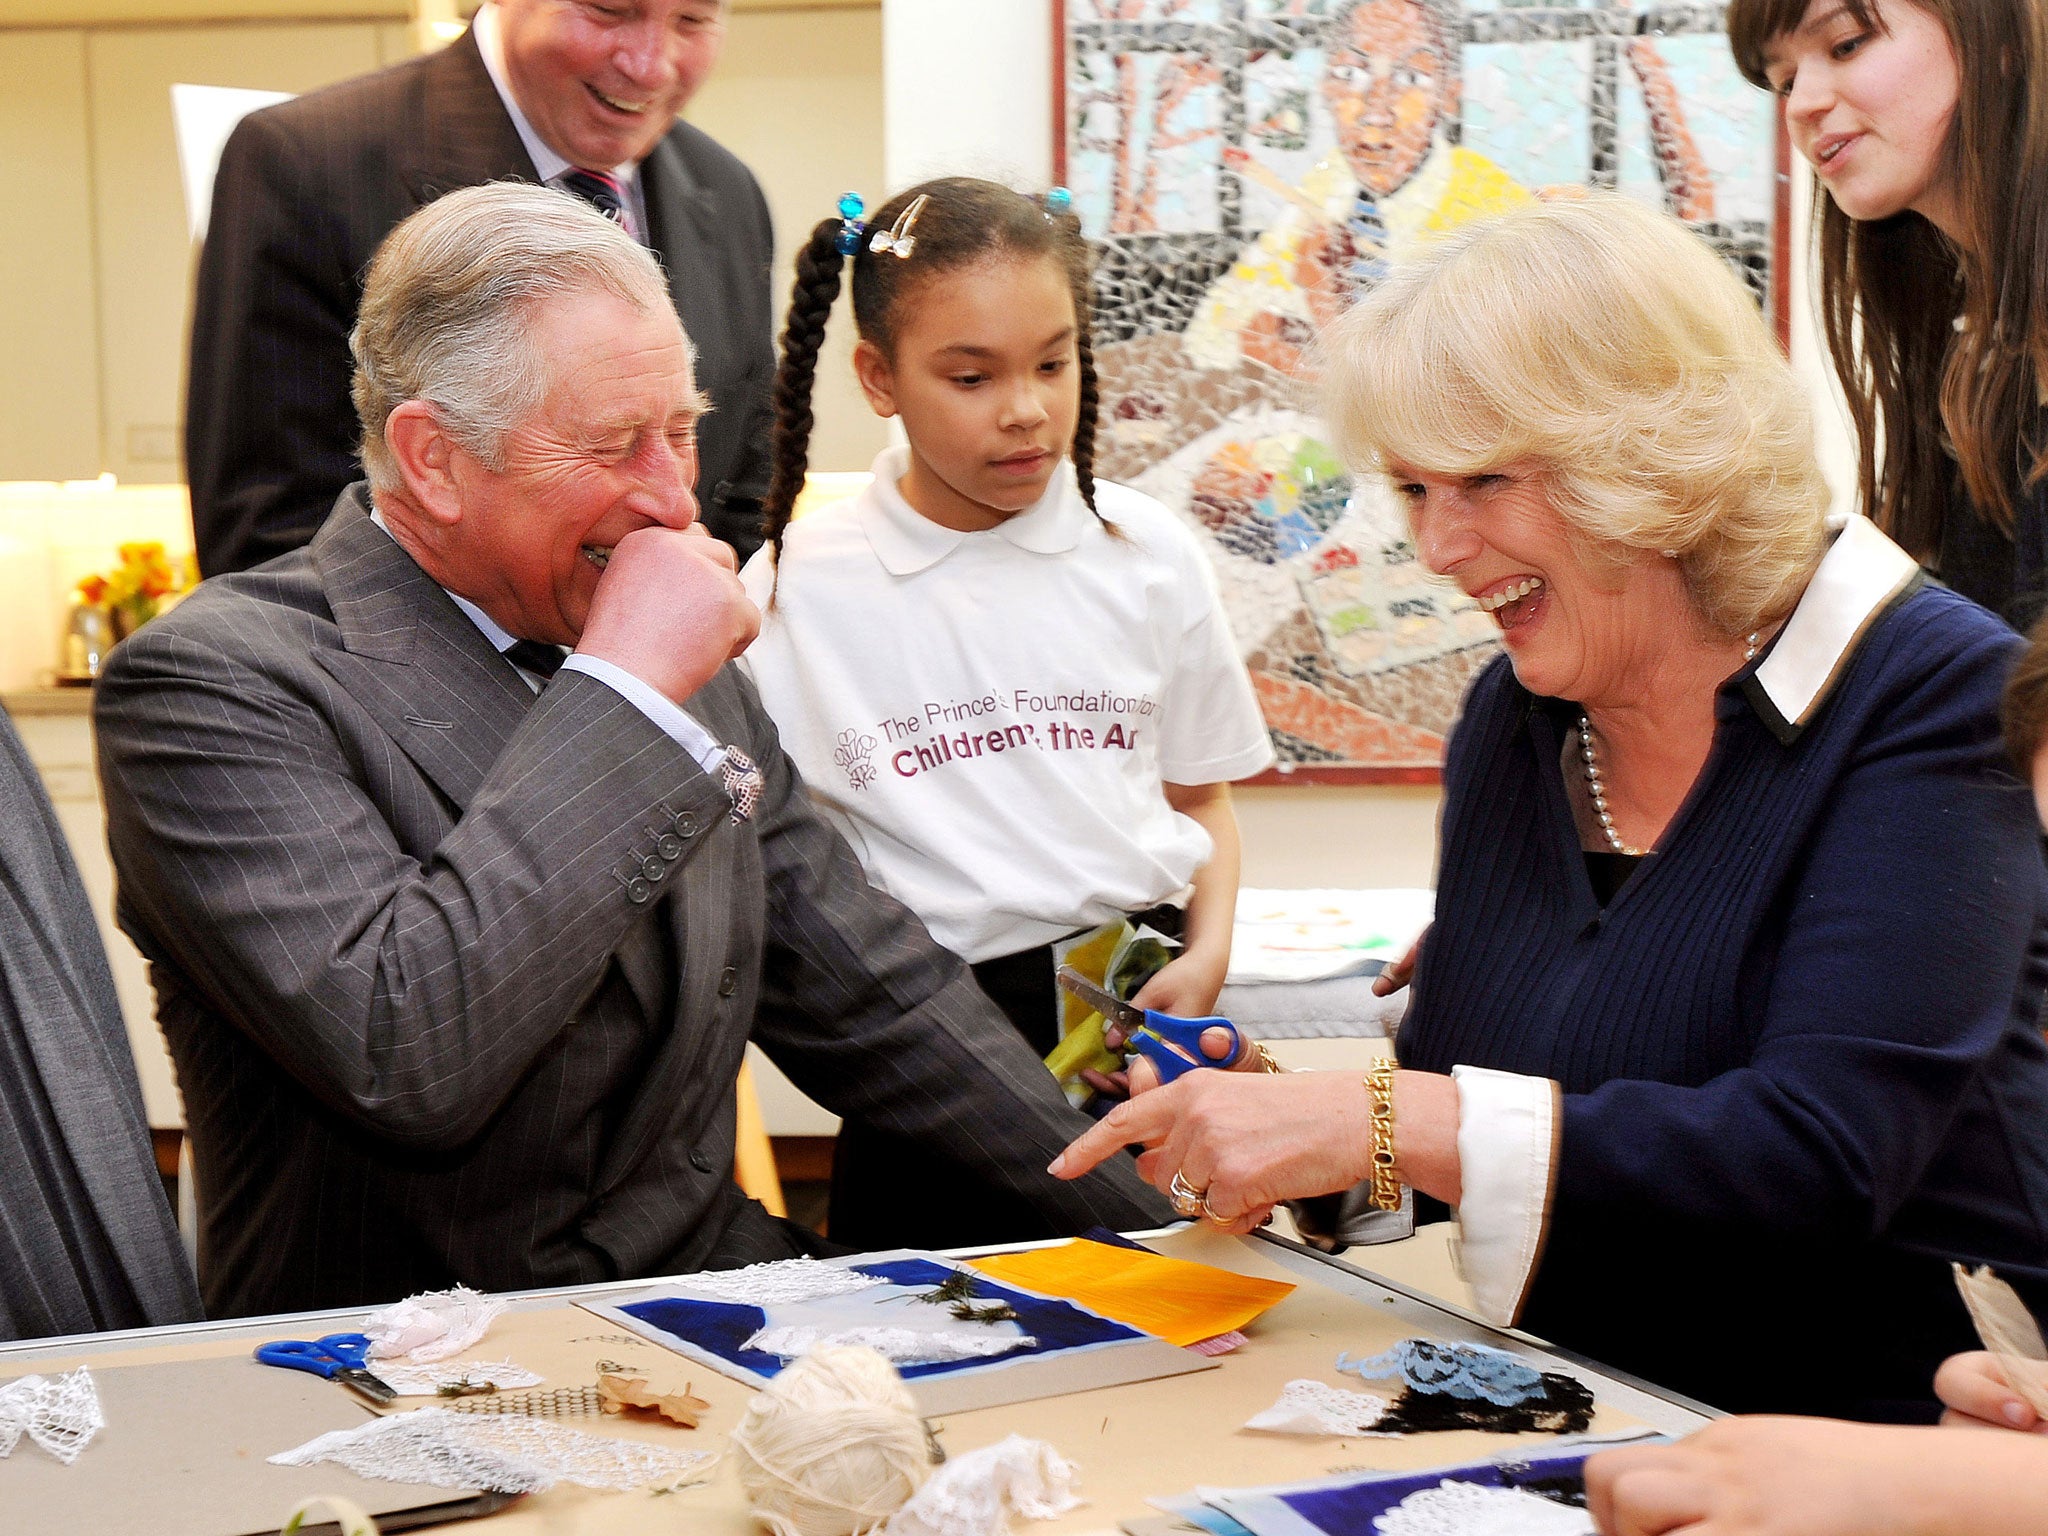 Prince Charles and the Duchess of Cornwall during a visit to the Dulwich Picture Gallery last year to see work done by the Prince’s Foundation for Children and the Arts